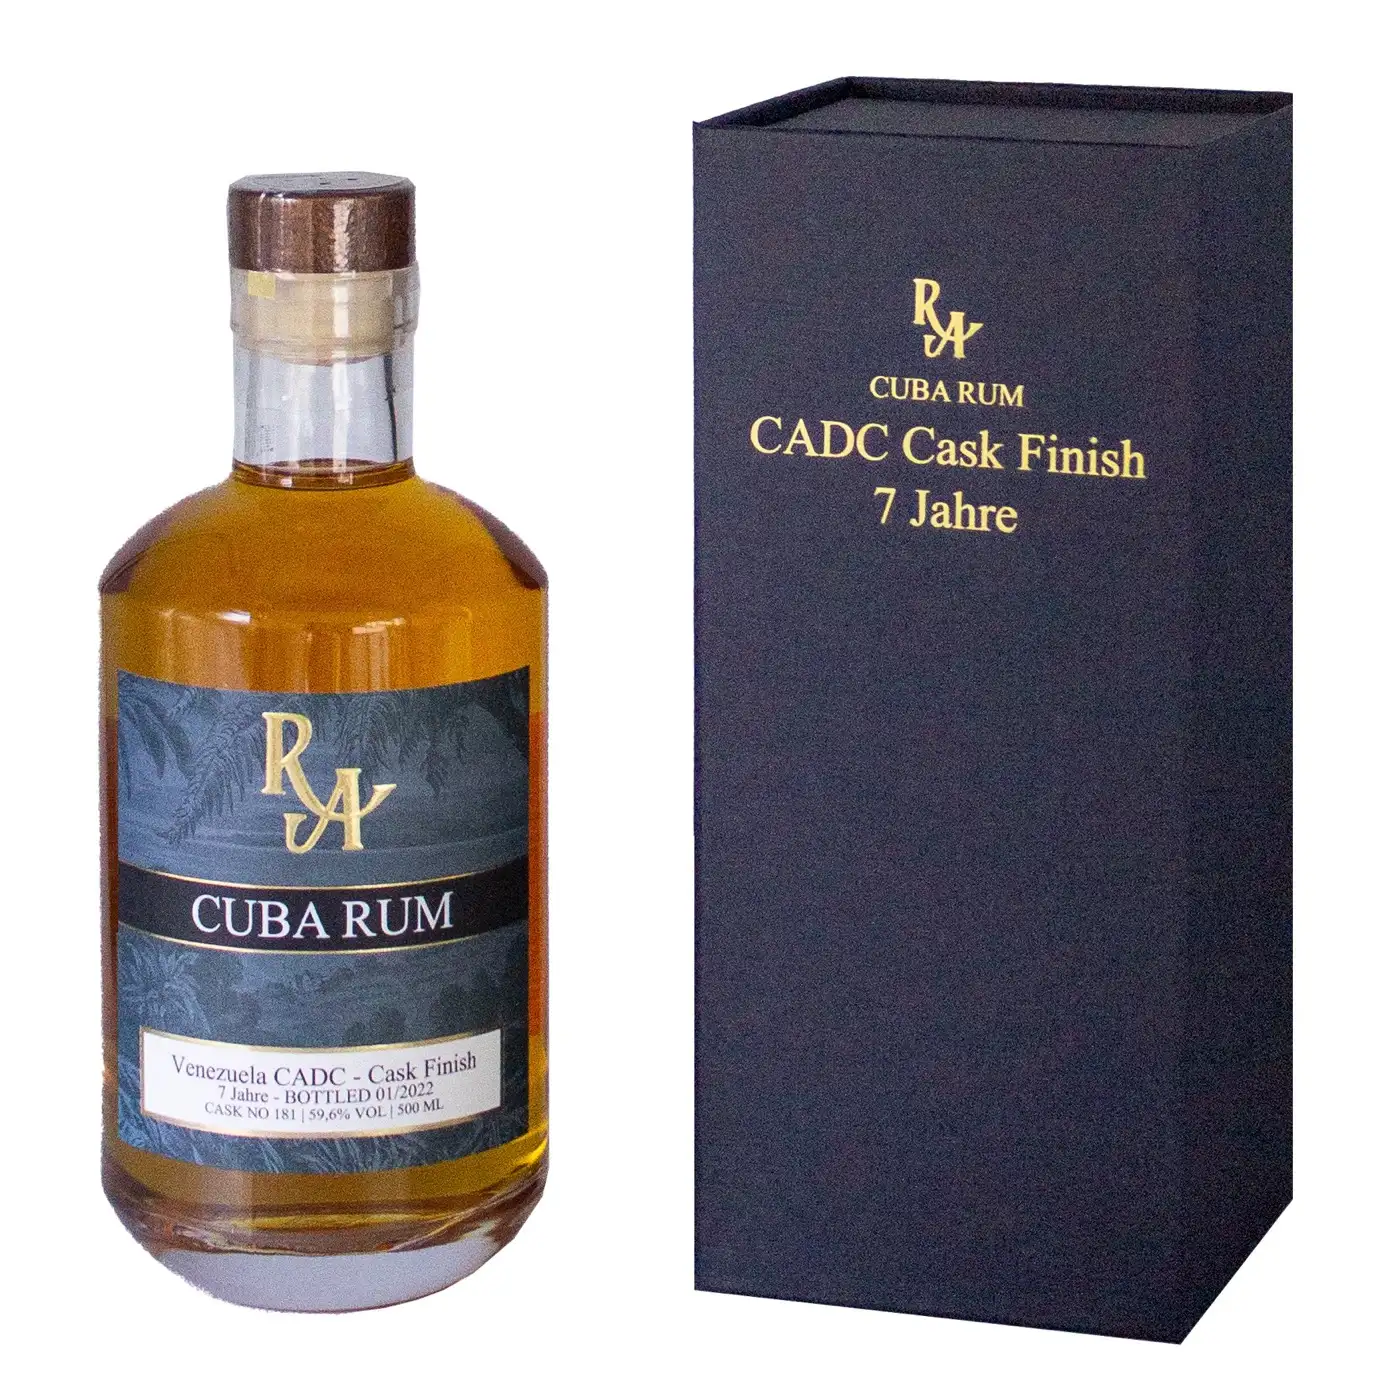 Image of the front of the bottle of the rum Rum Artesanal Cuba Rum (CADC Finish)